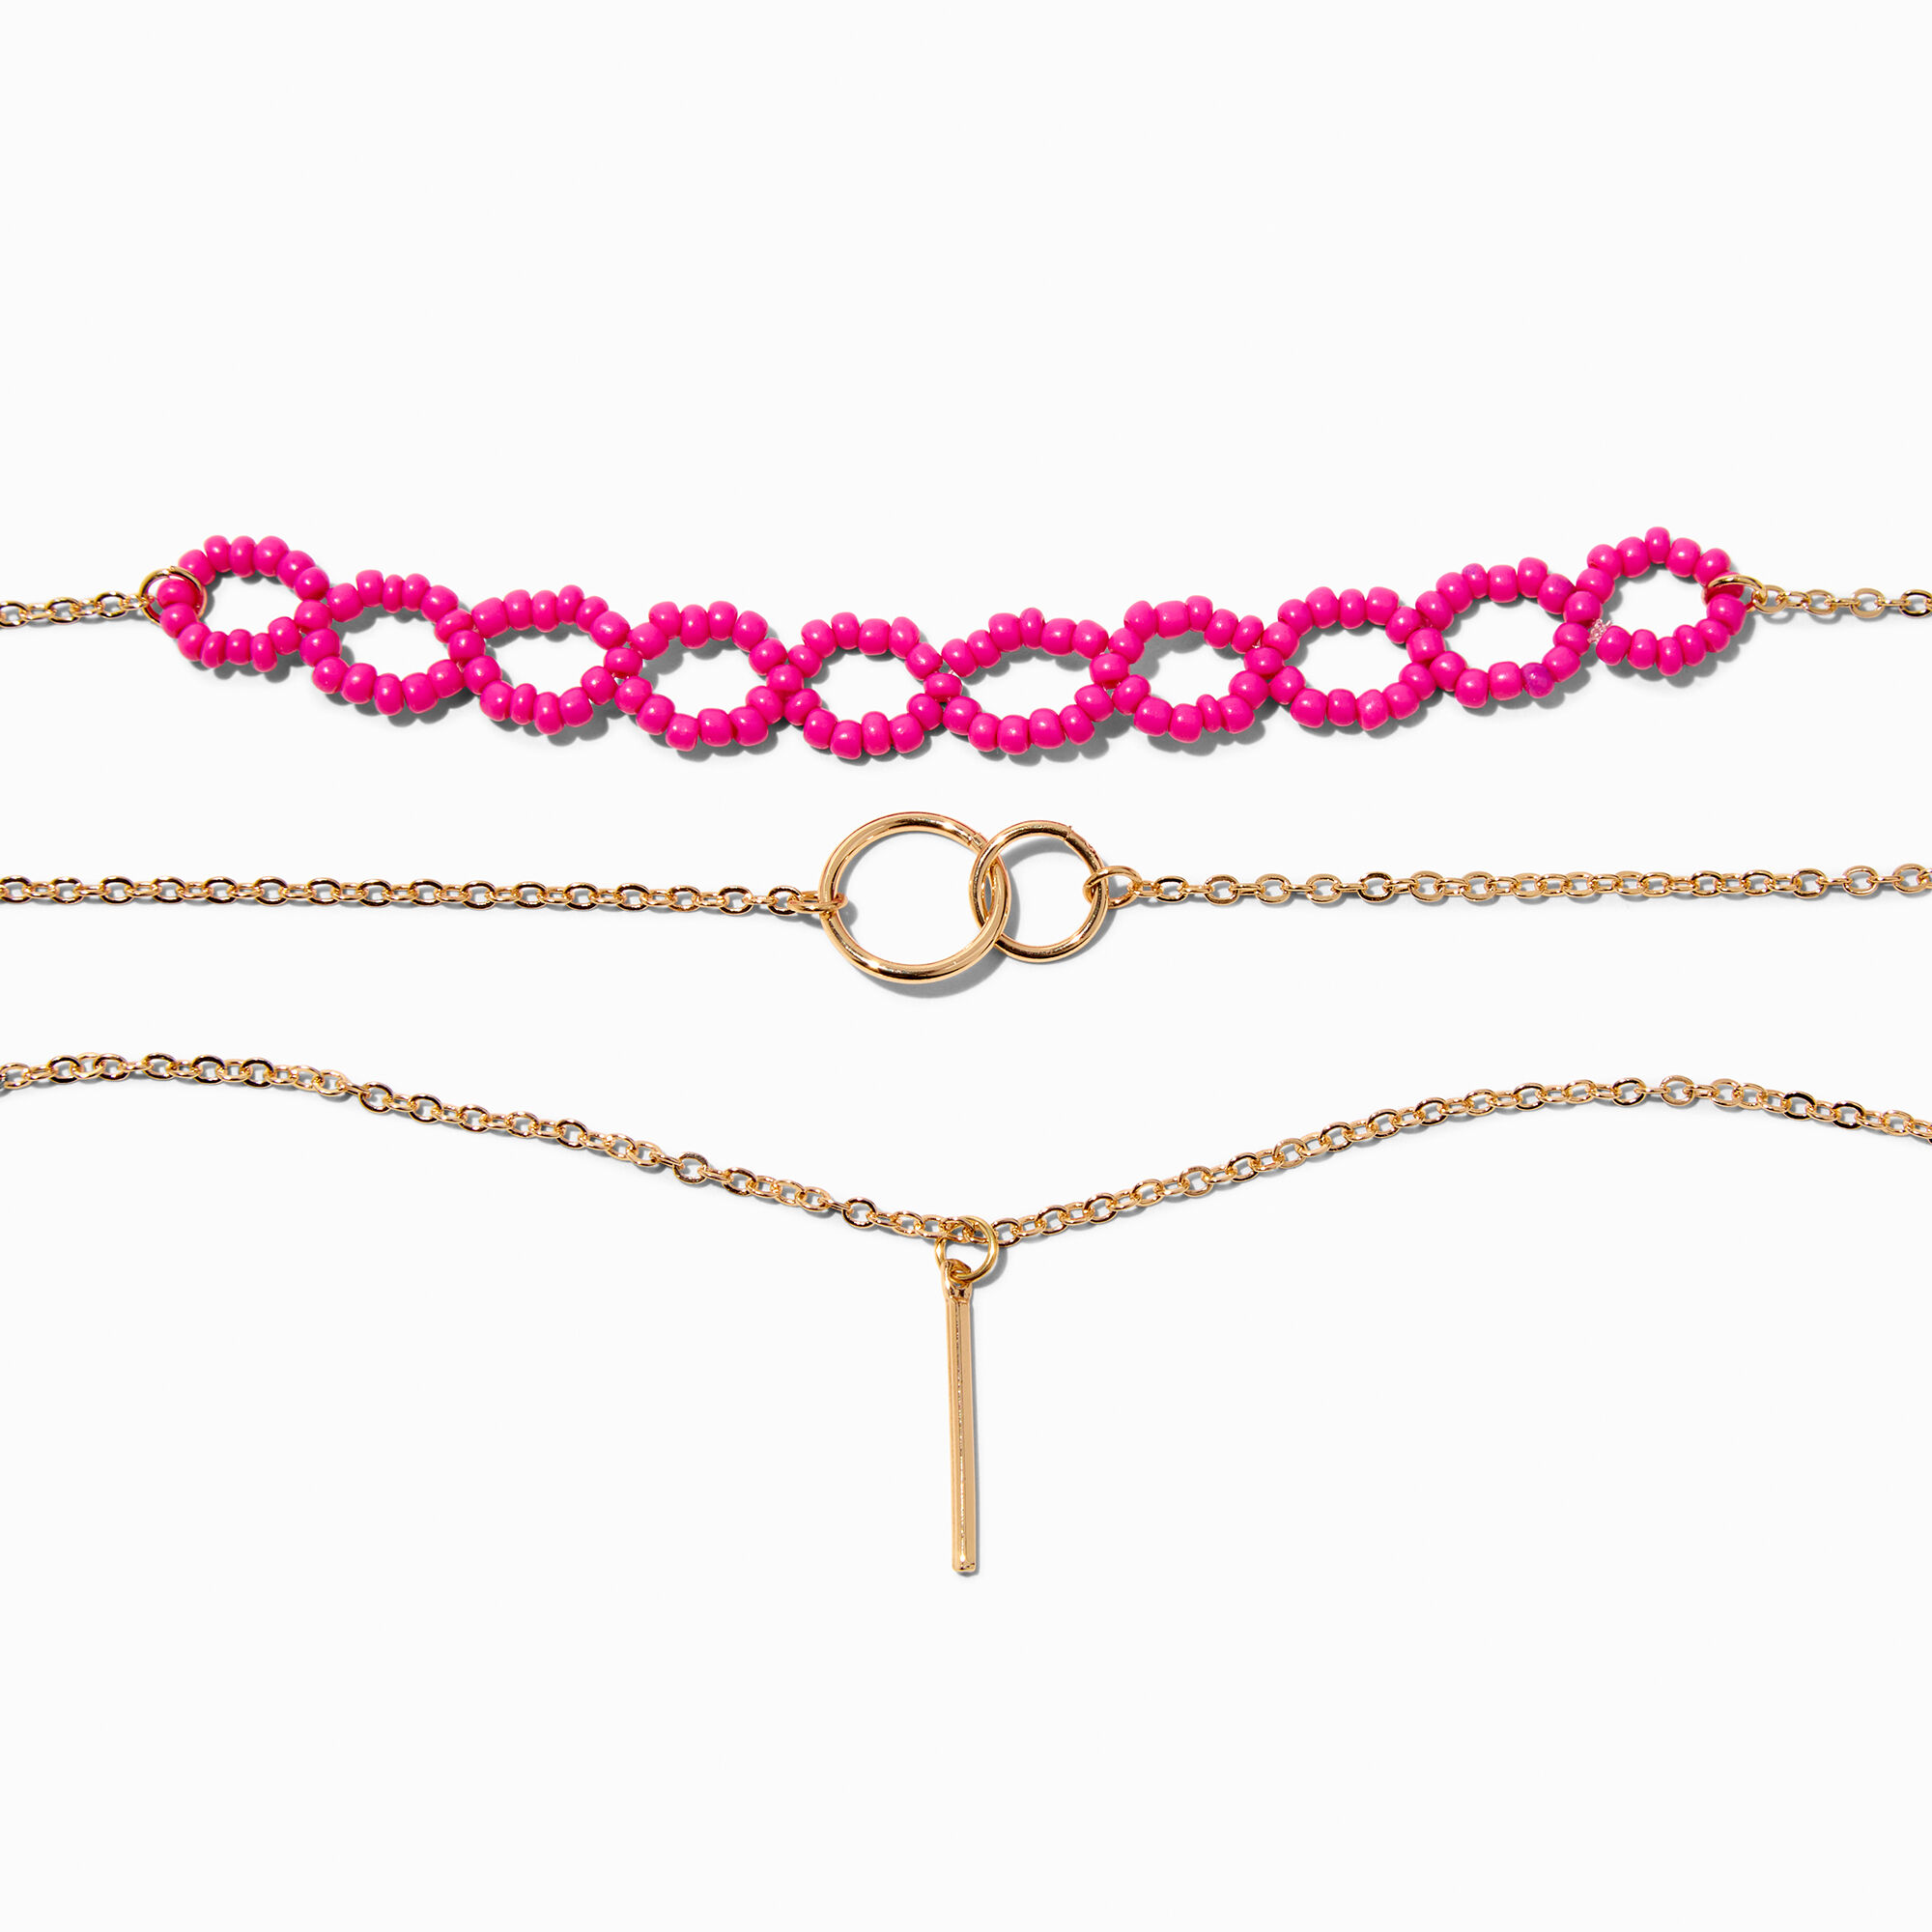 View Claires GoldTone Infinity Beaded Choker Necklaces 3 Pack Pink information